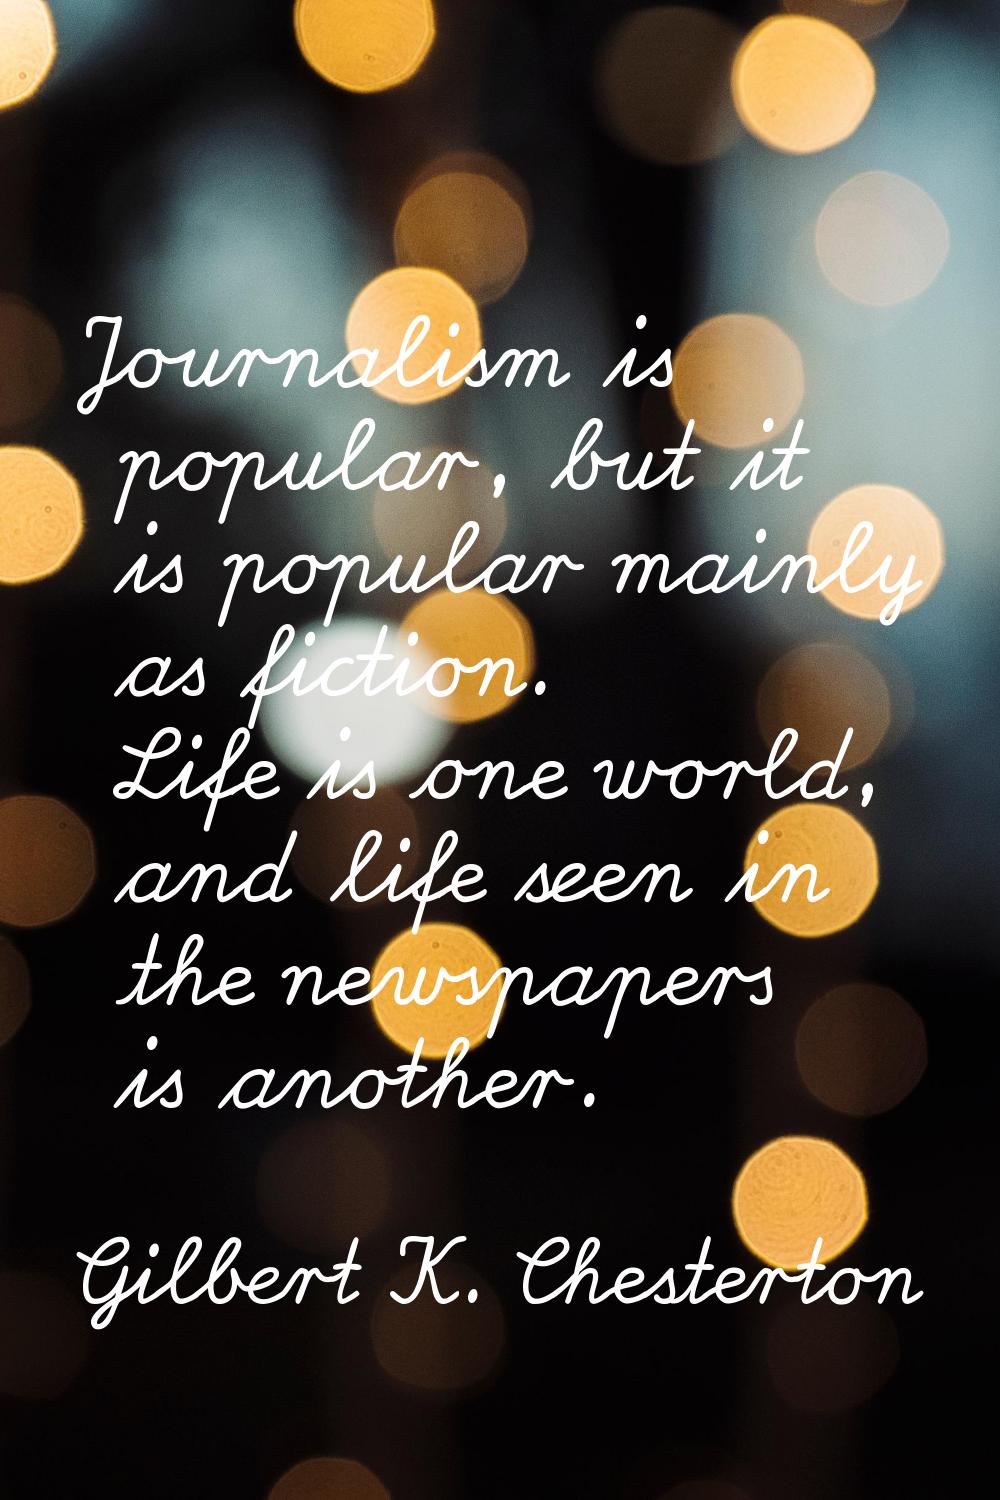 Journalism is popular, but it is popular mainly as fiction. Life is one world, and life seen in the